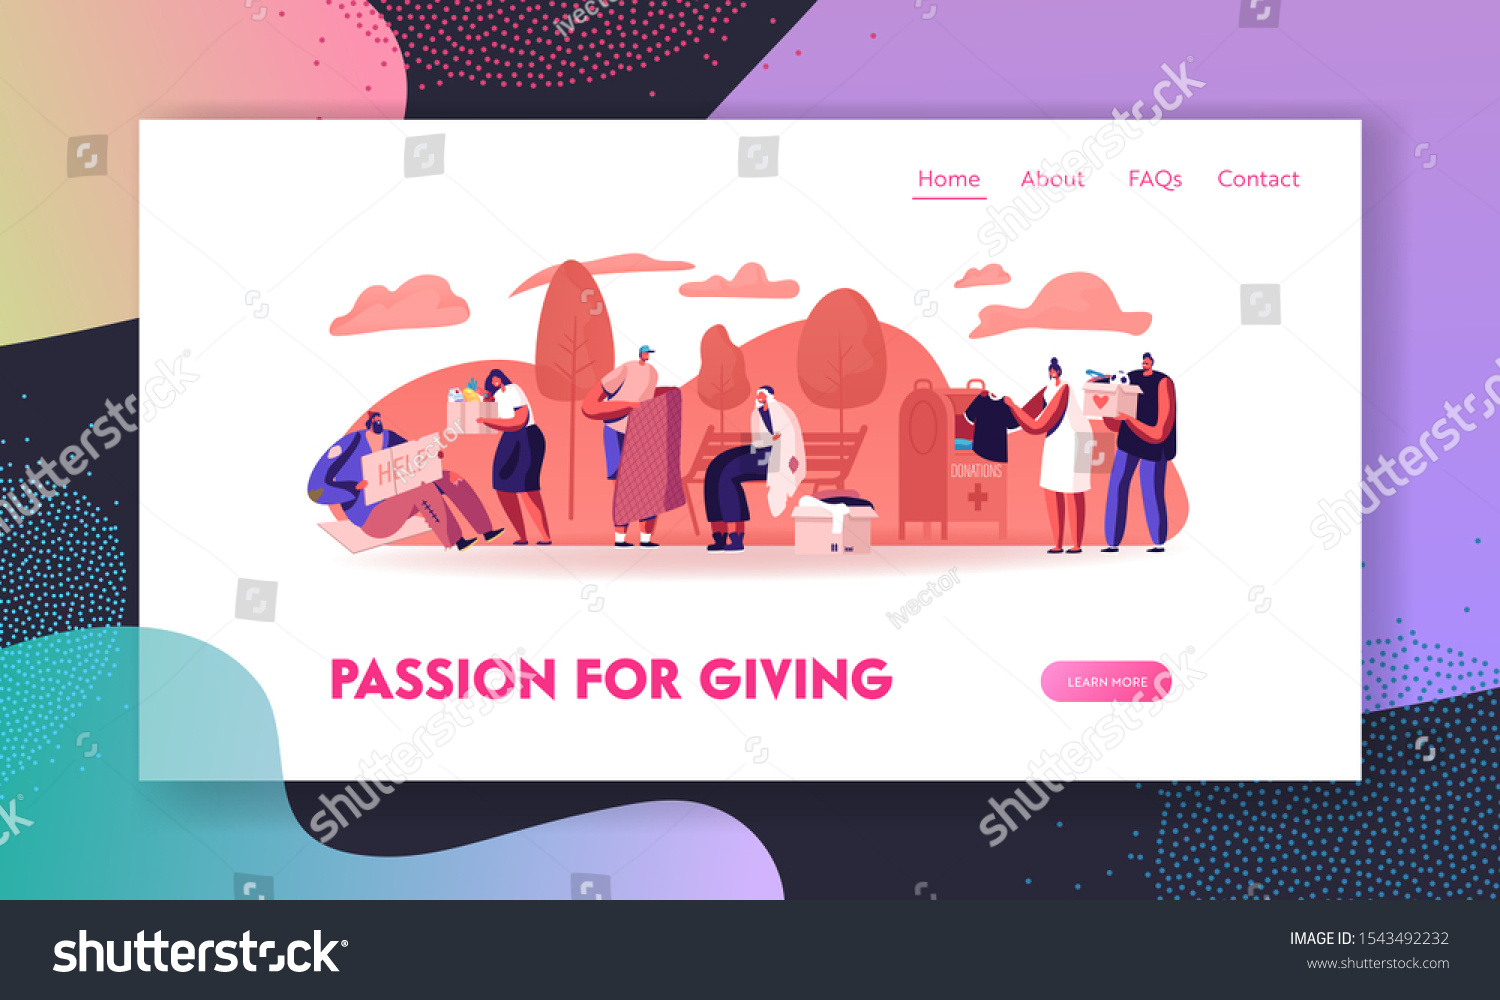 SVG of Donation Charity and Support to Beggars Website Landing Page. Volunteers Help Homeless Poor Unemployed People Living on Street Giving Food and Clothes Web Page Banner. Cartoon Flat Vector Illustration svg